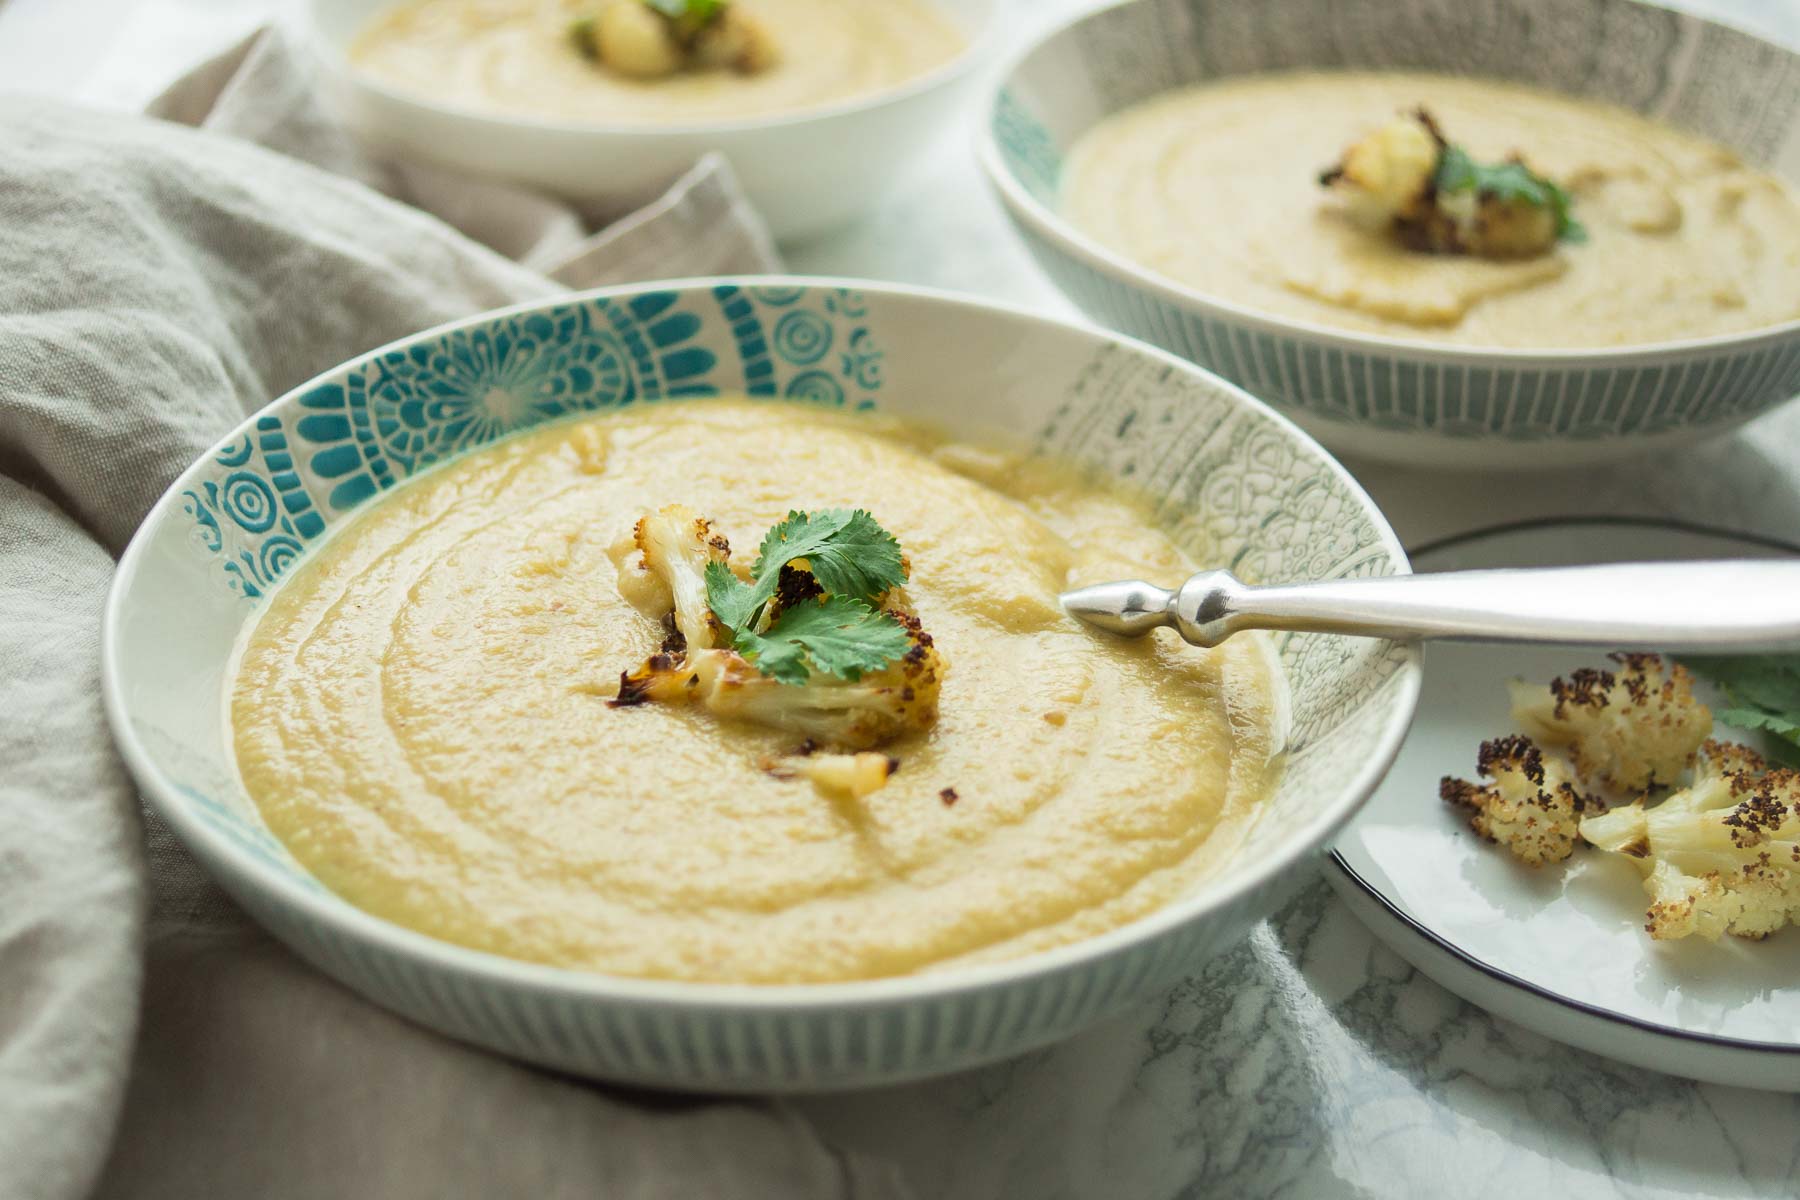 Moroccan-Spiced Roasted Cauliflower Soup with yellow lentils, vegan recipe